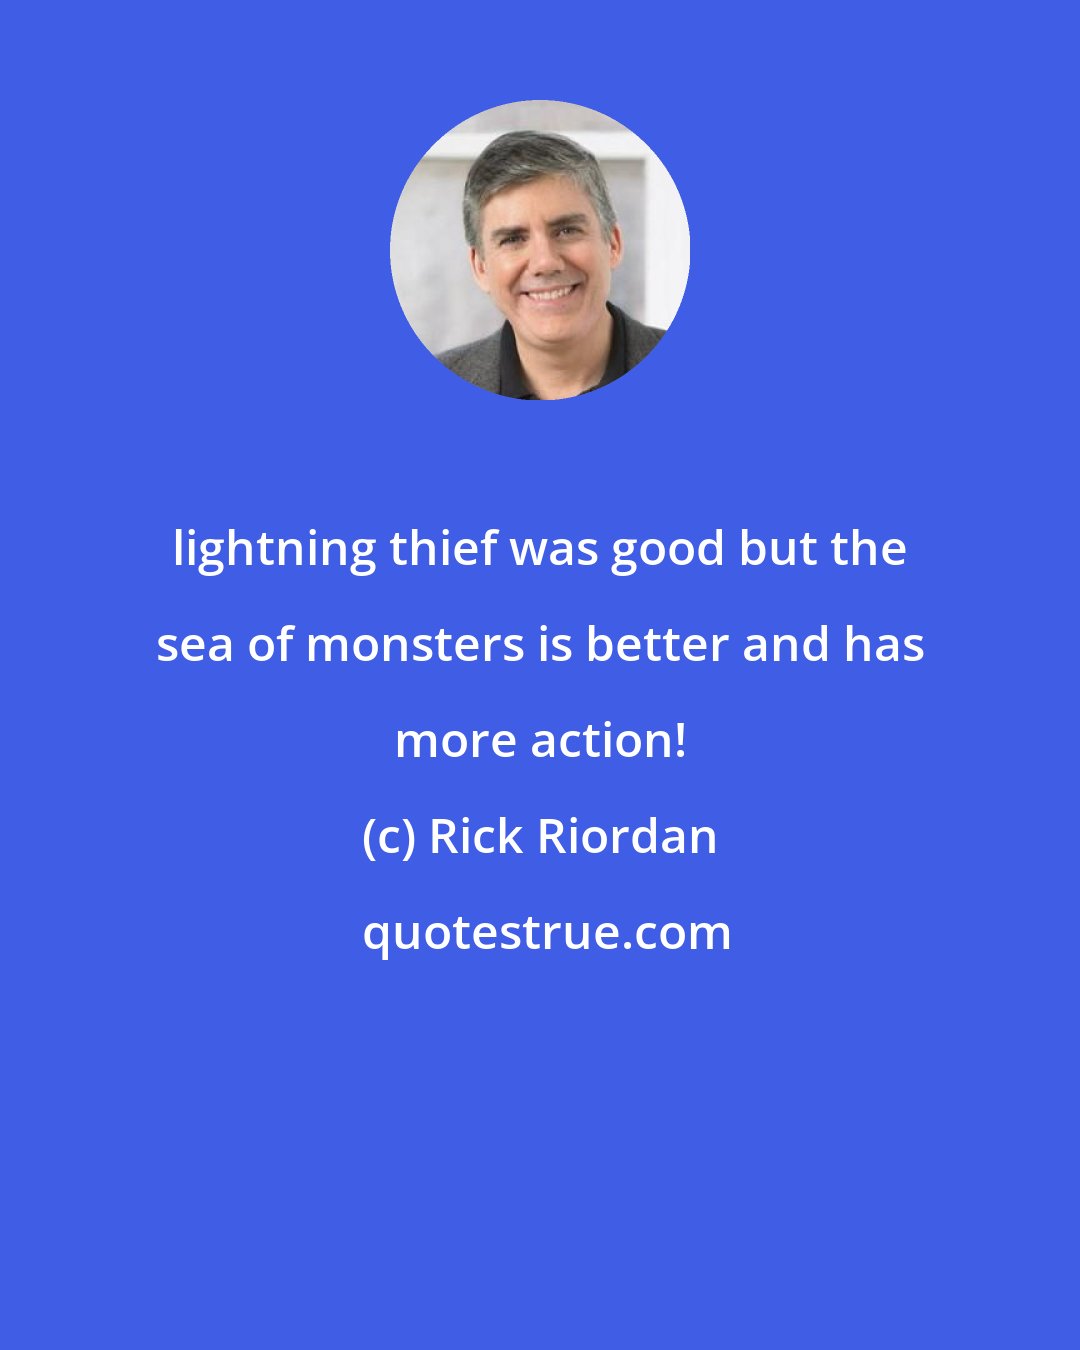 Rick Riordan: lightning thief was good but the sea of monsters is better and has more action!